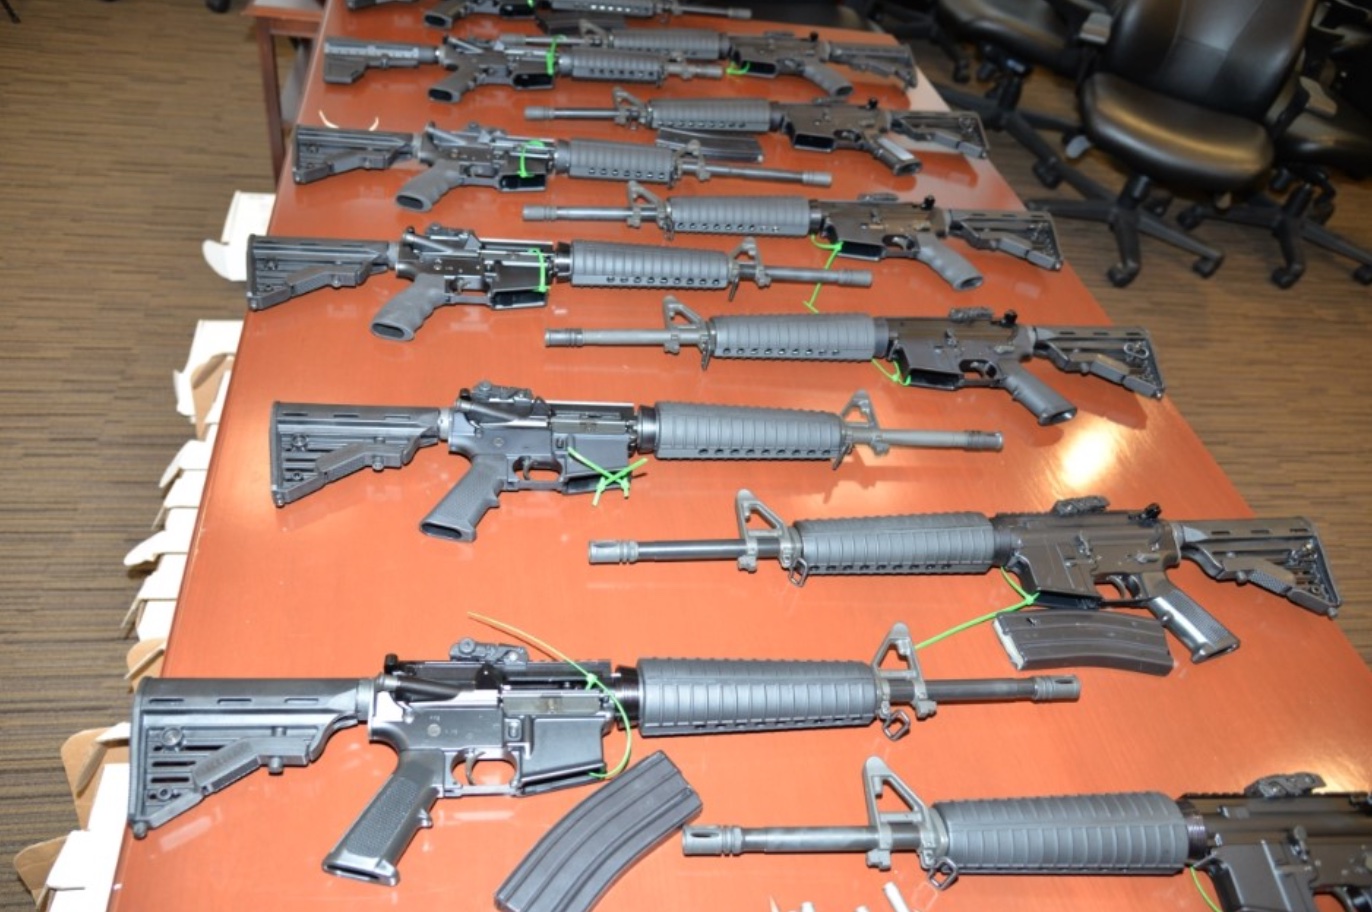 Confiscated guns; image from press release.